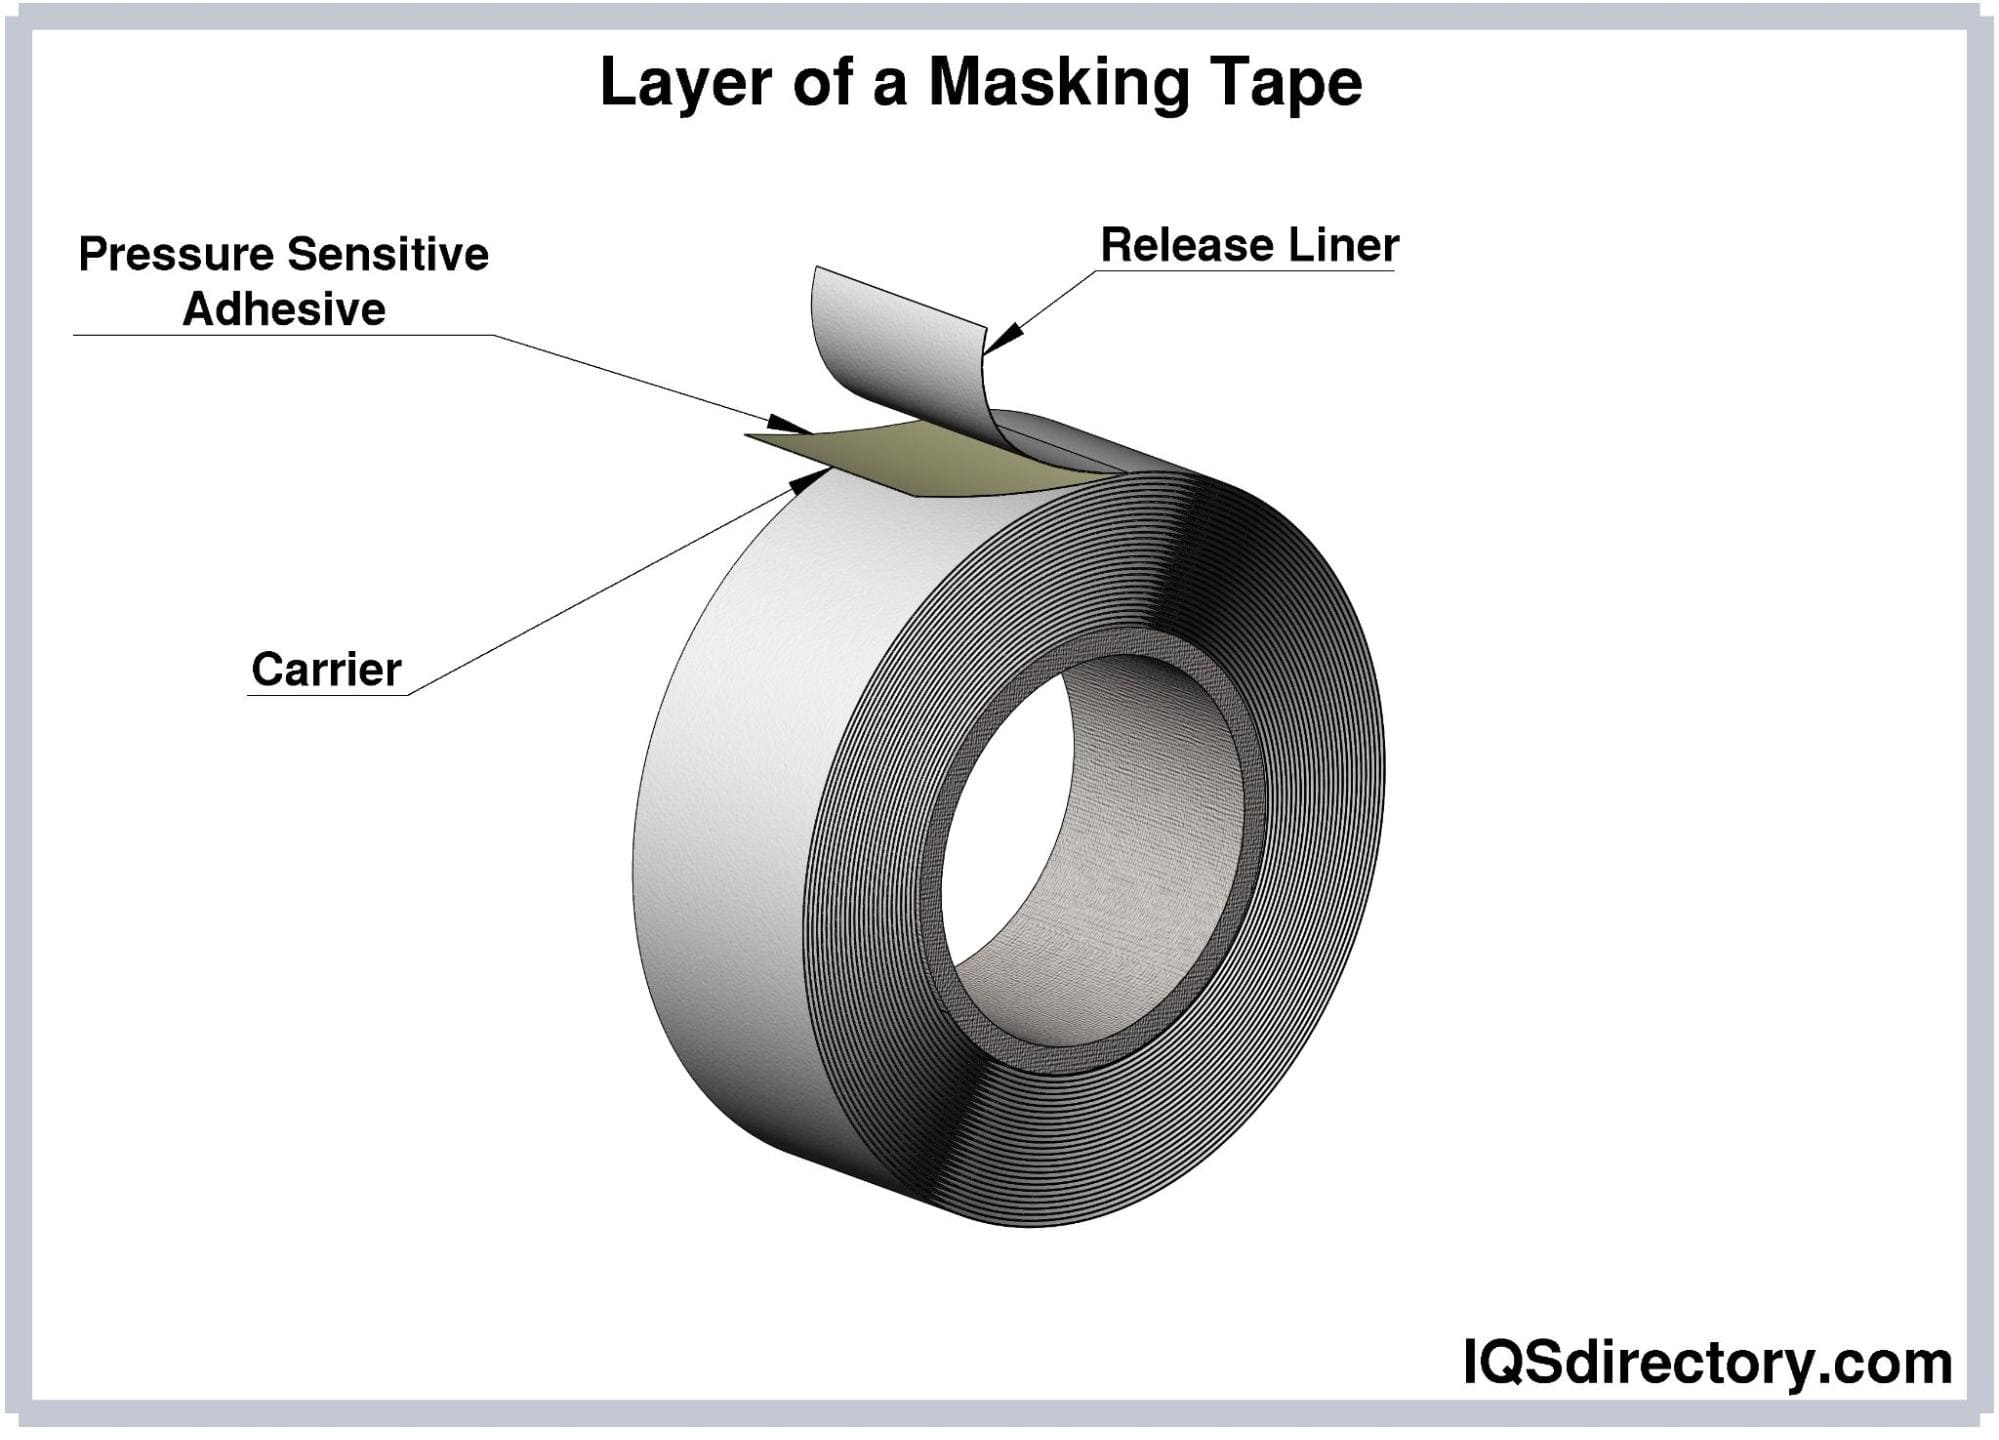 Layer of a Masking Tape